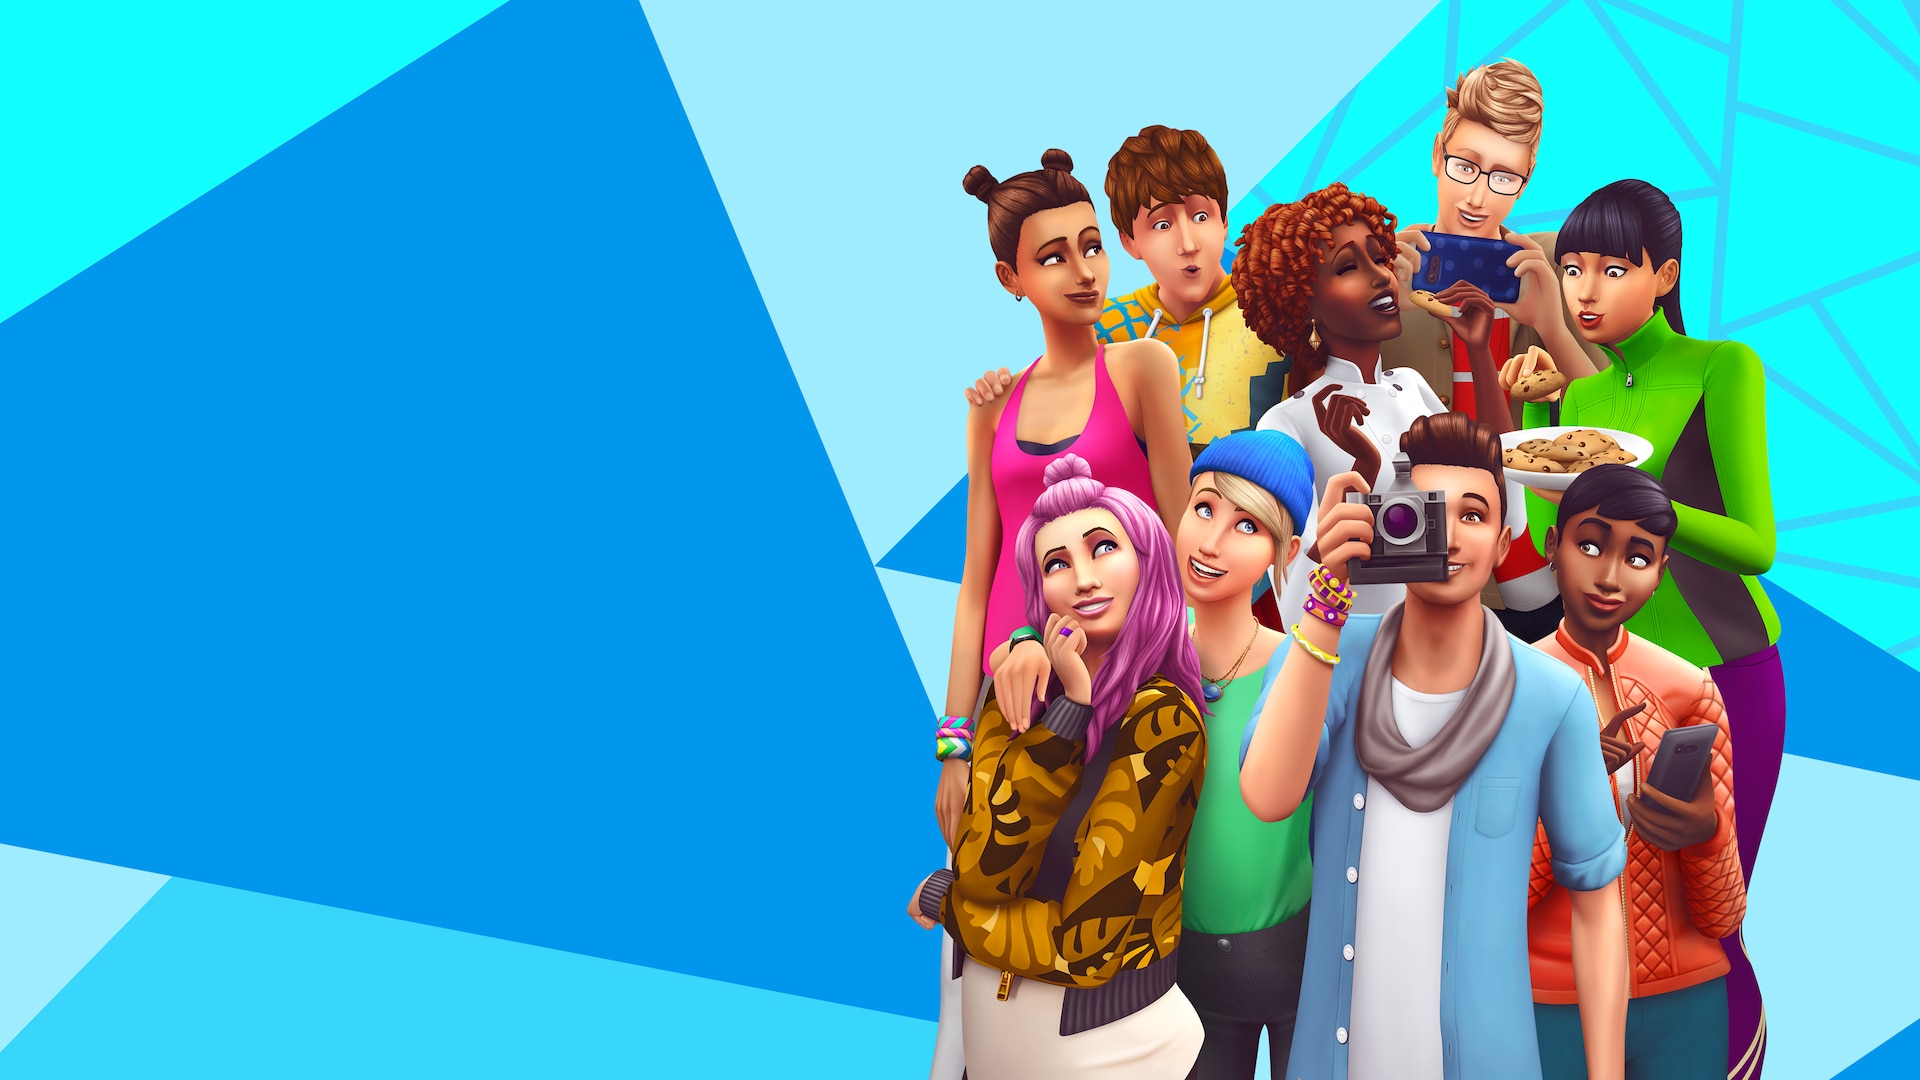 The Sims 4 base game is going free-to-play in October